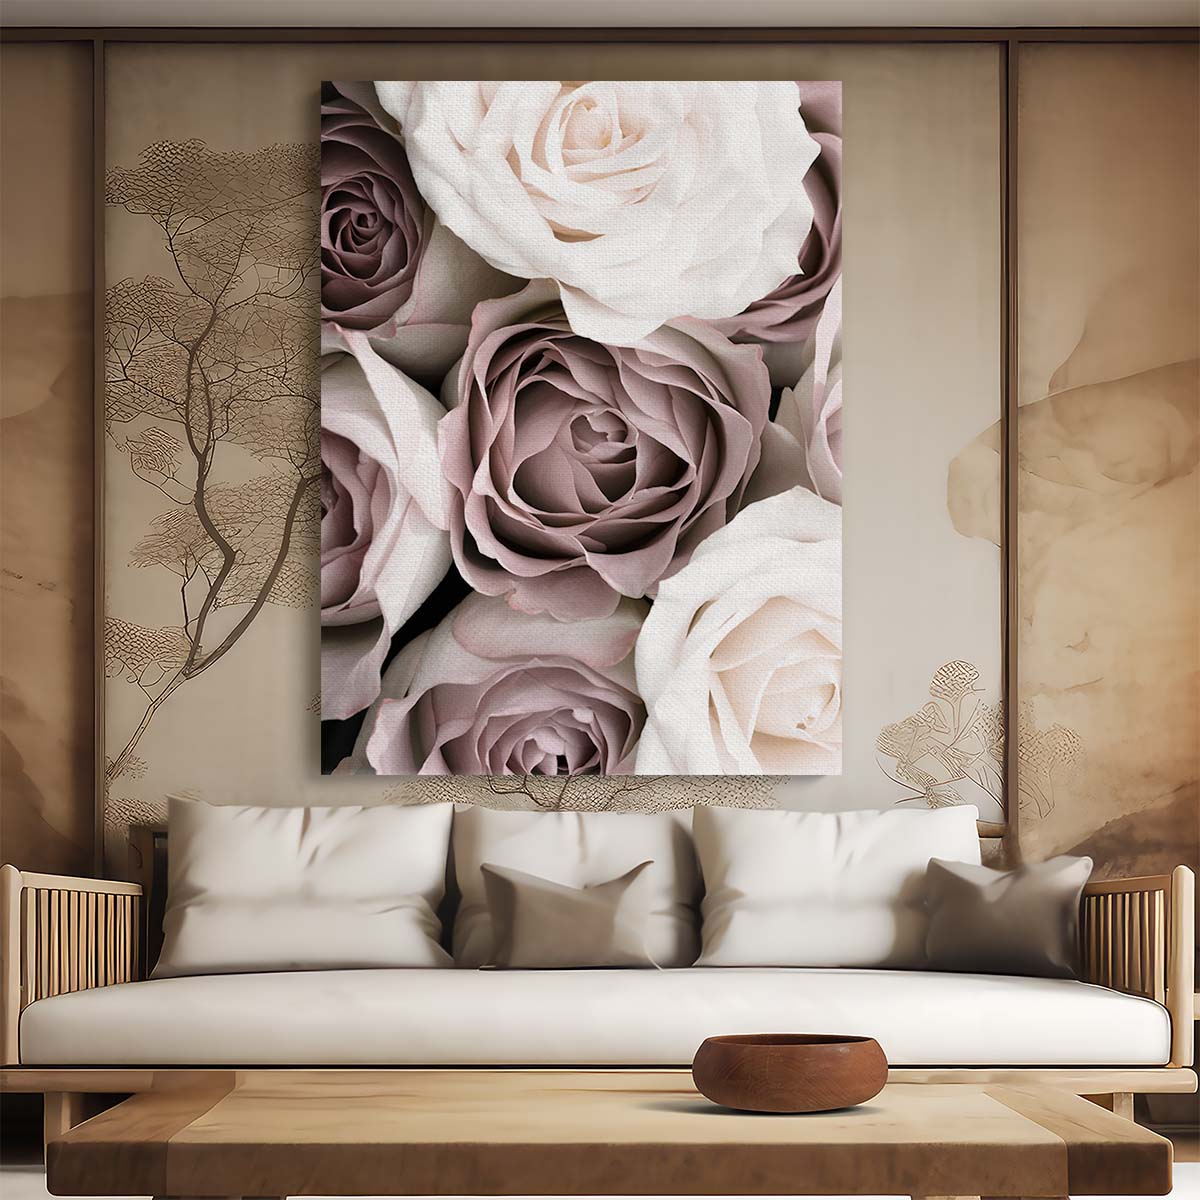 Botanical Still Life Photography Blossoming Pink Rose Flowers by Luxuriance Designs, made in USA